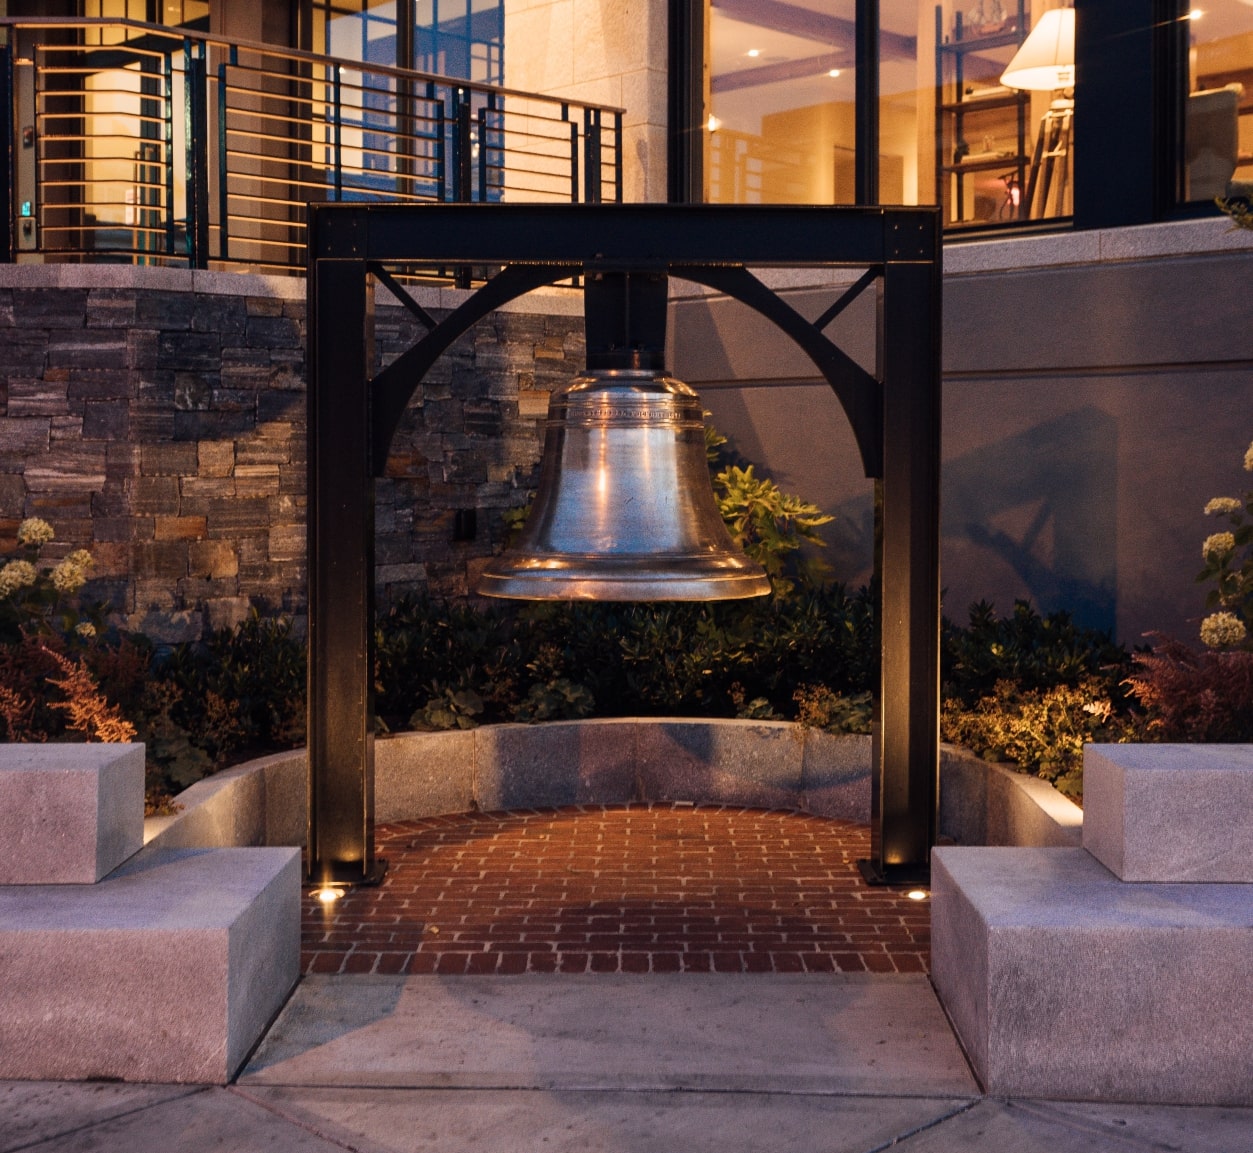 A large bell mounted at the center of a paved area with benches, illuminated by warm lights at dusk, near several places to stay in Newport.